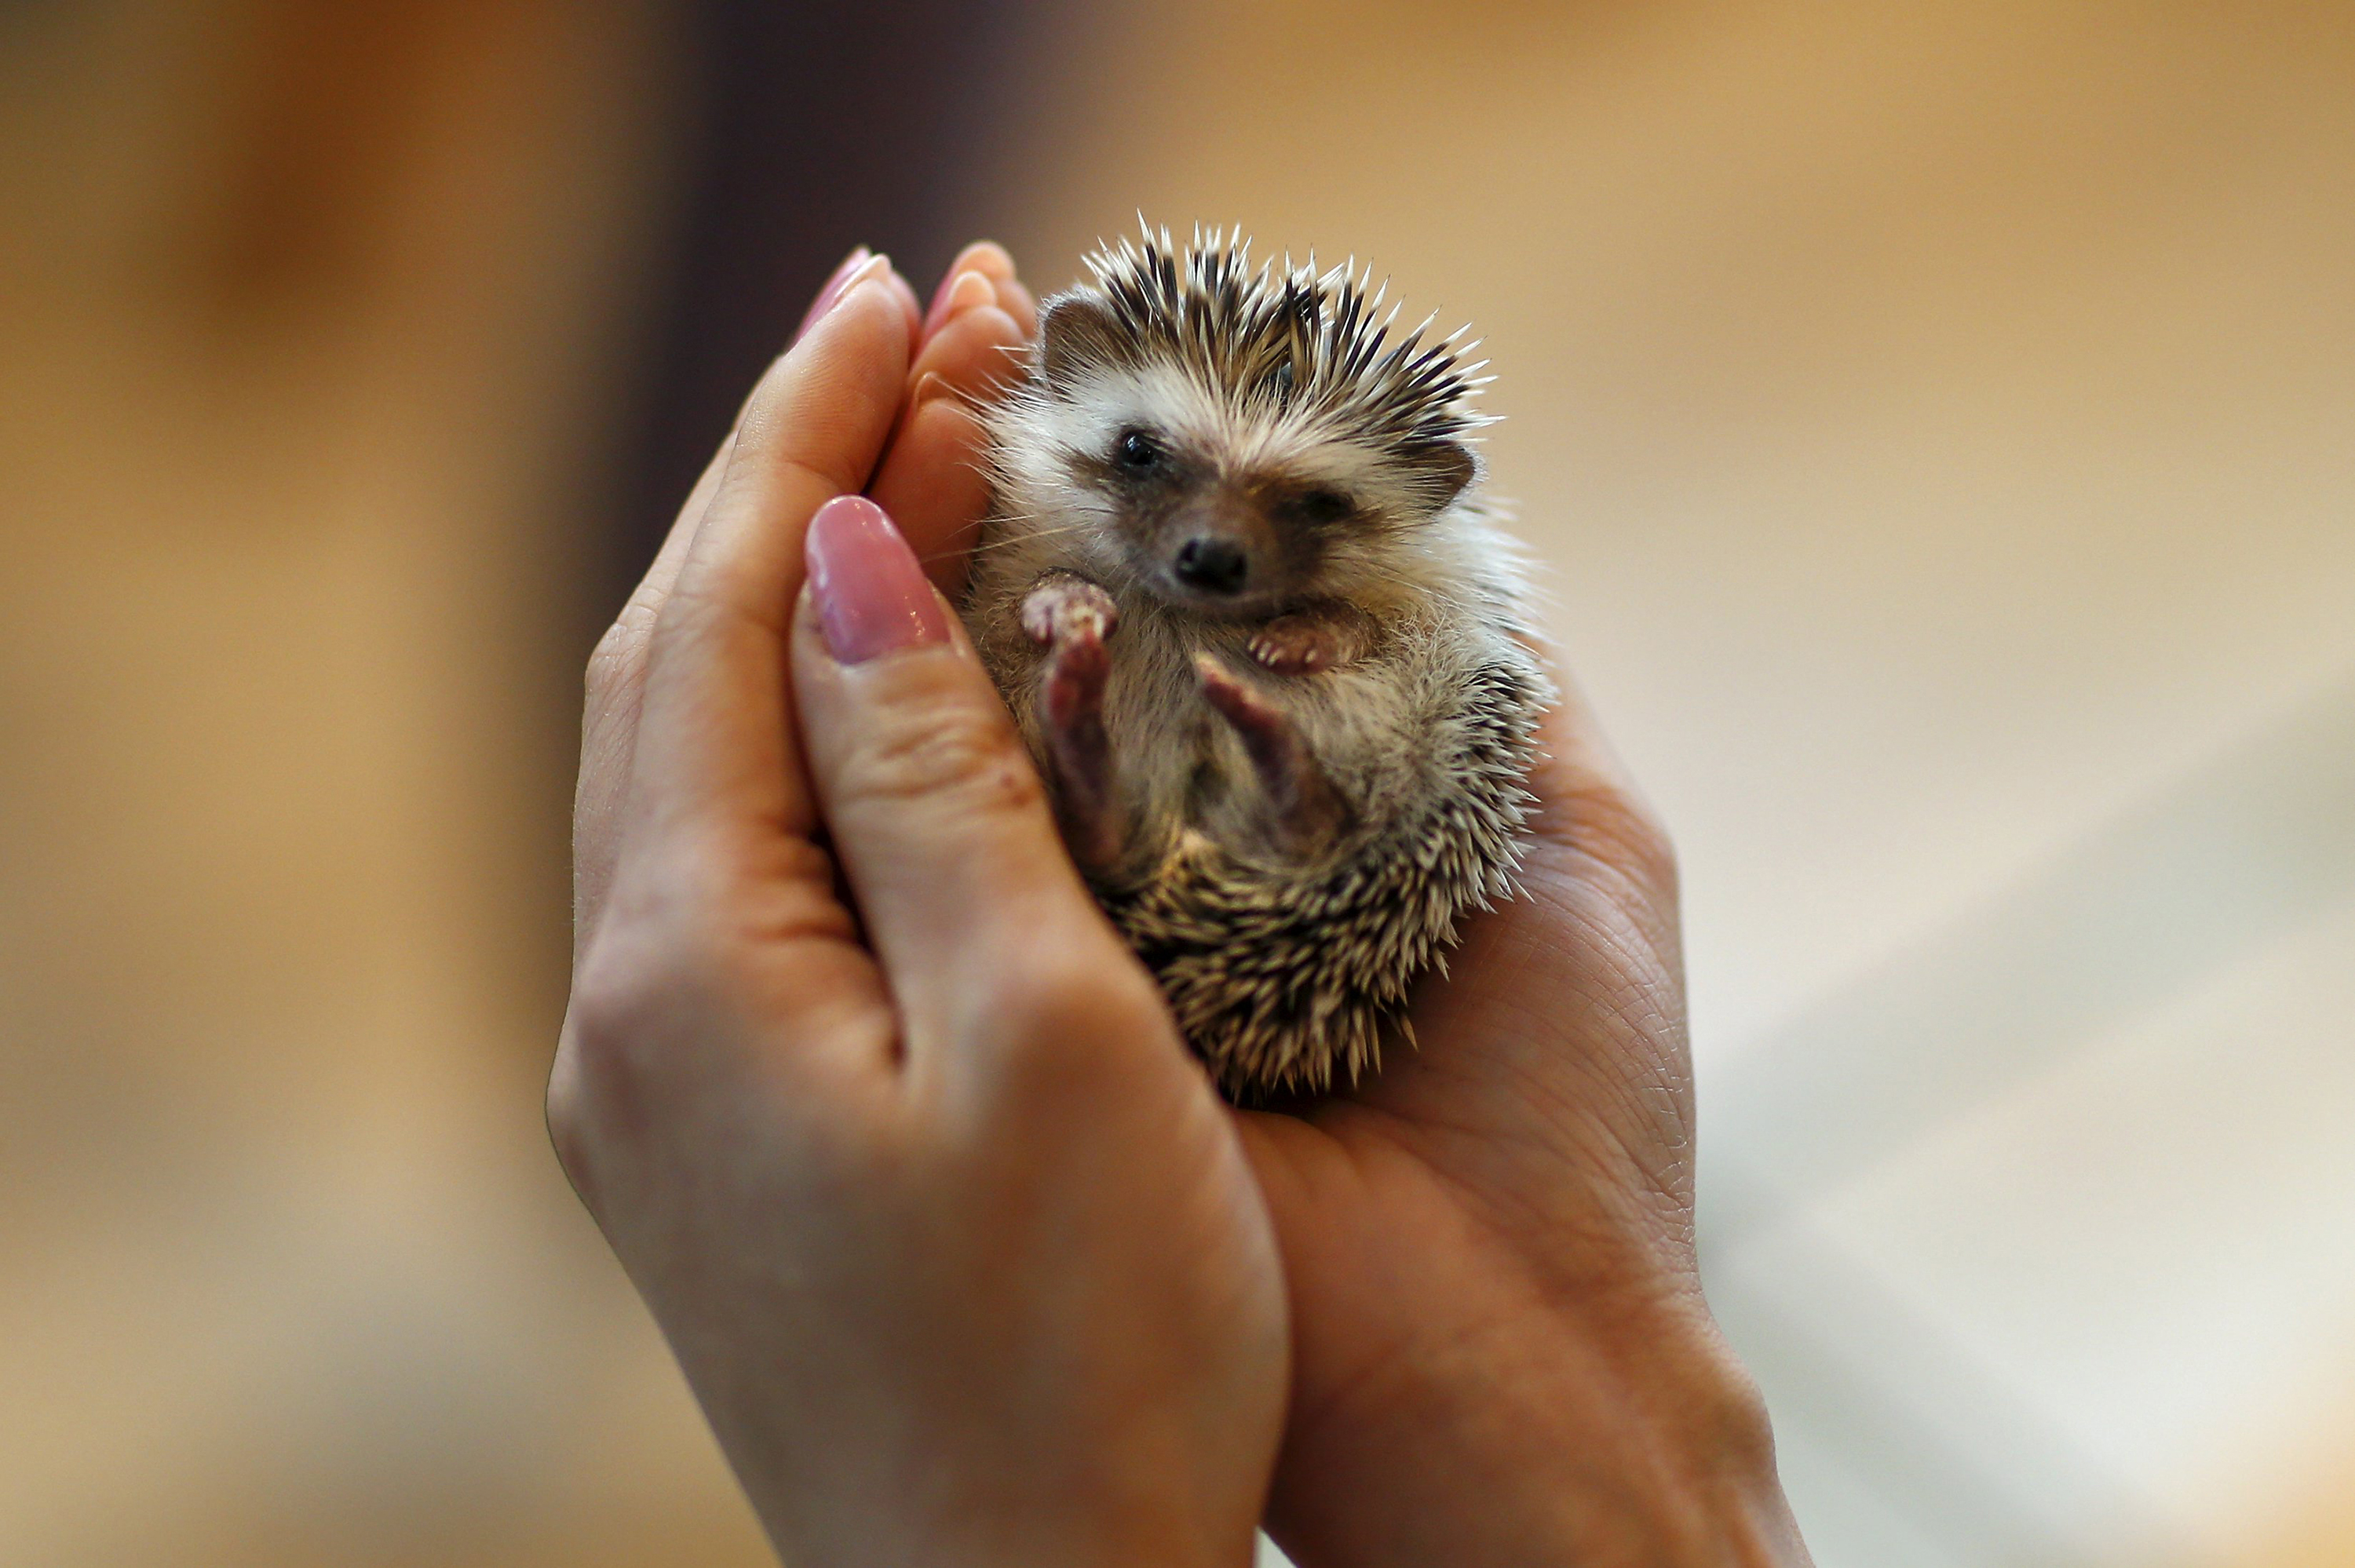 Prickly package: A woman holds a hedgehog at the Harry hedgehog cafe in Tokyo. | REUTERS